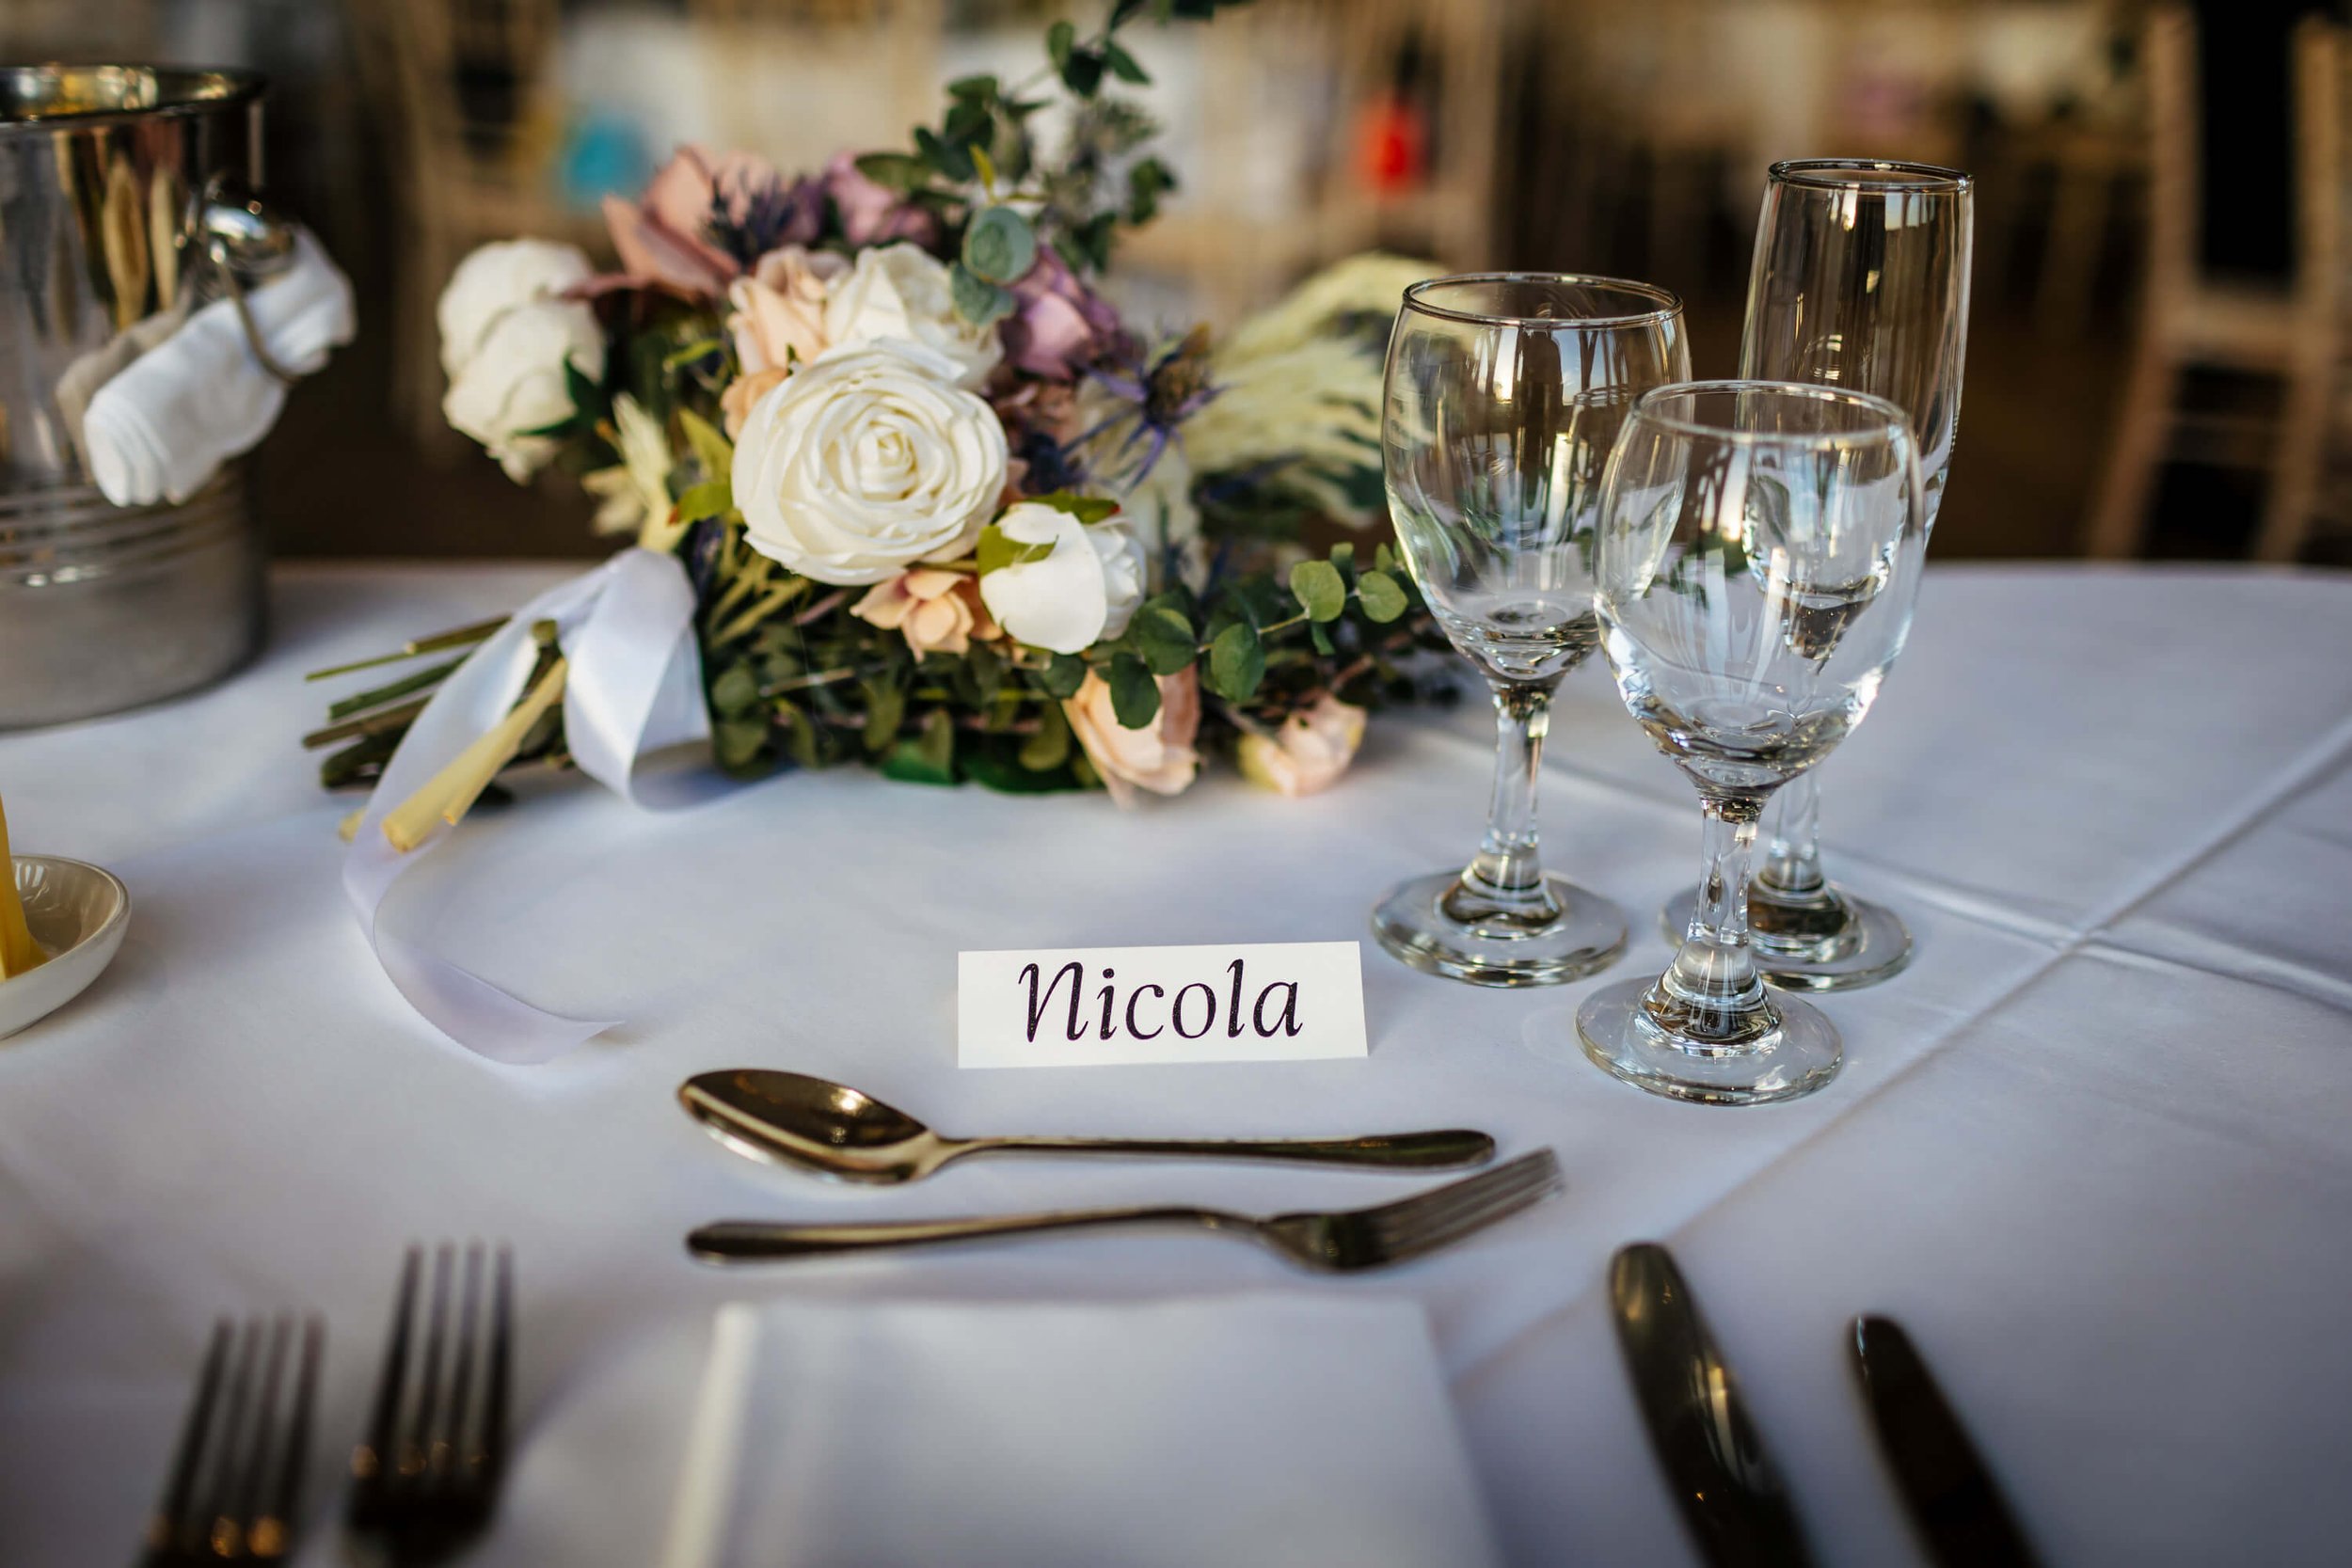 Table set up for a wedding with the Bride's name place